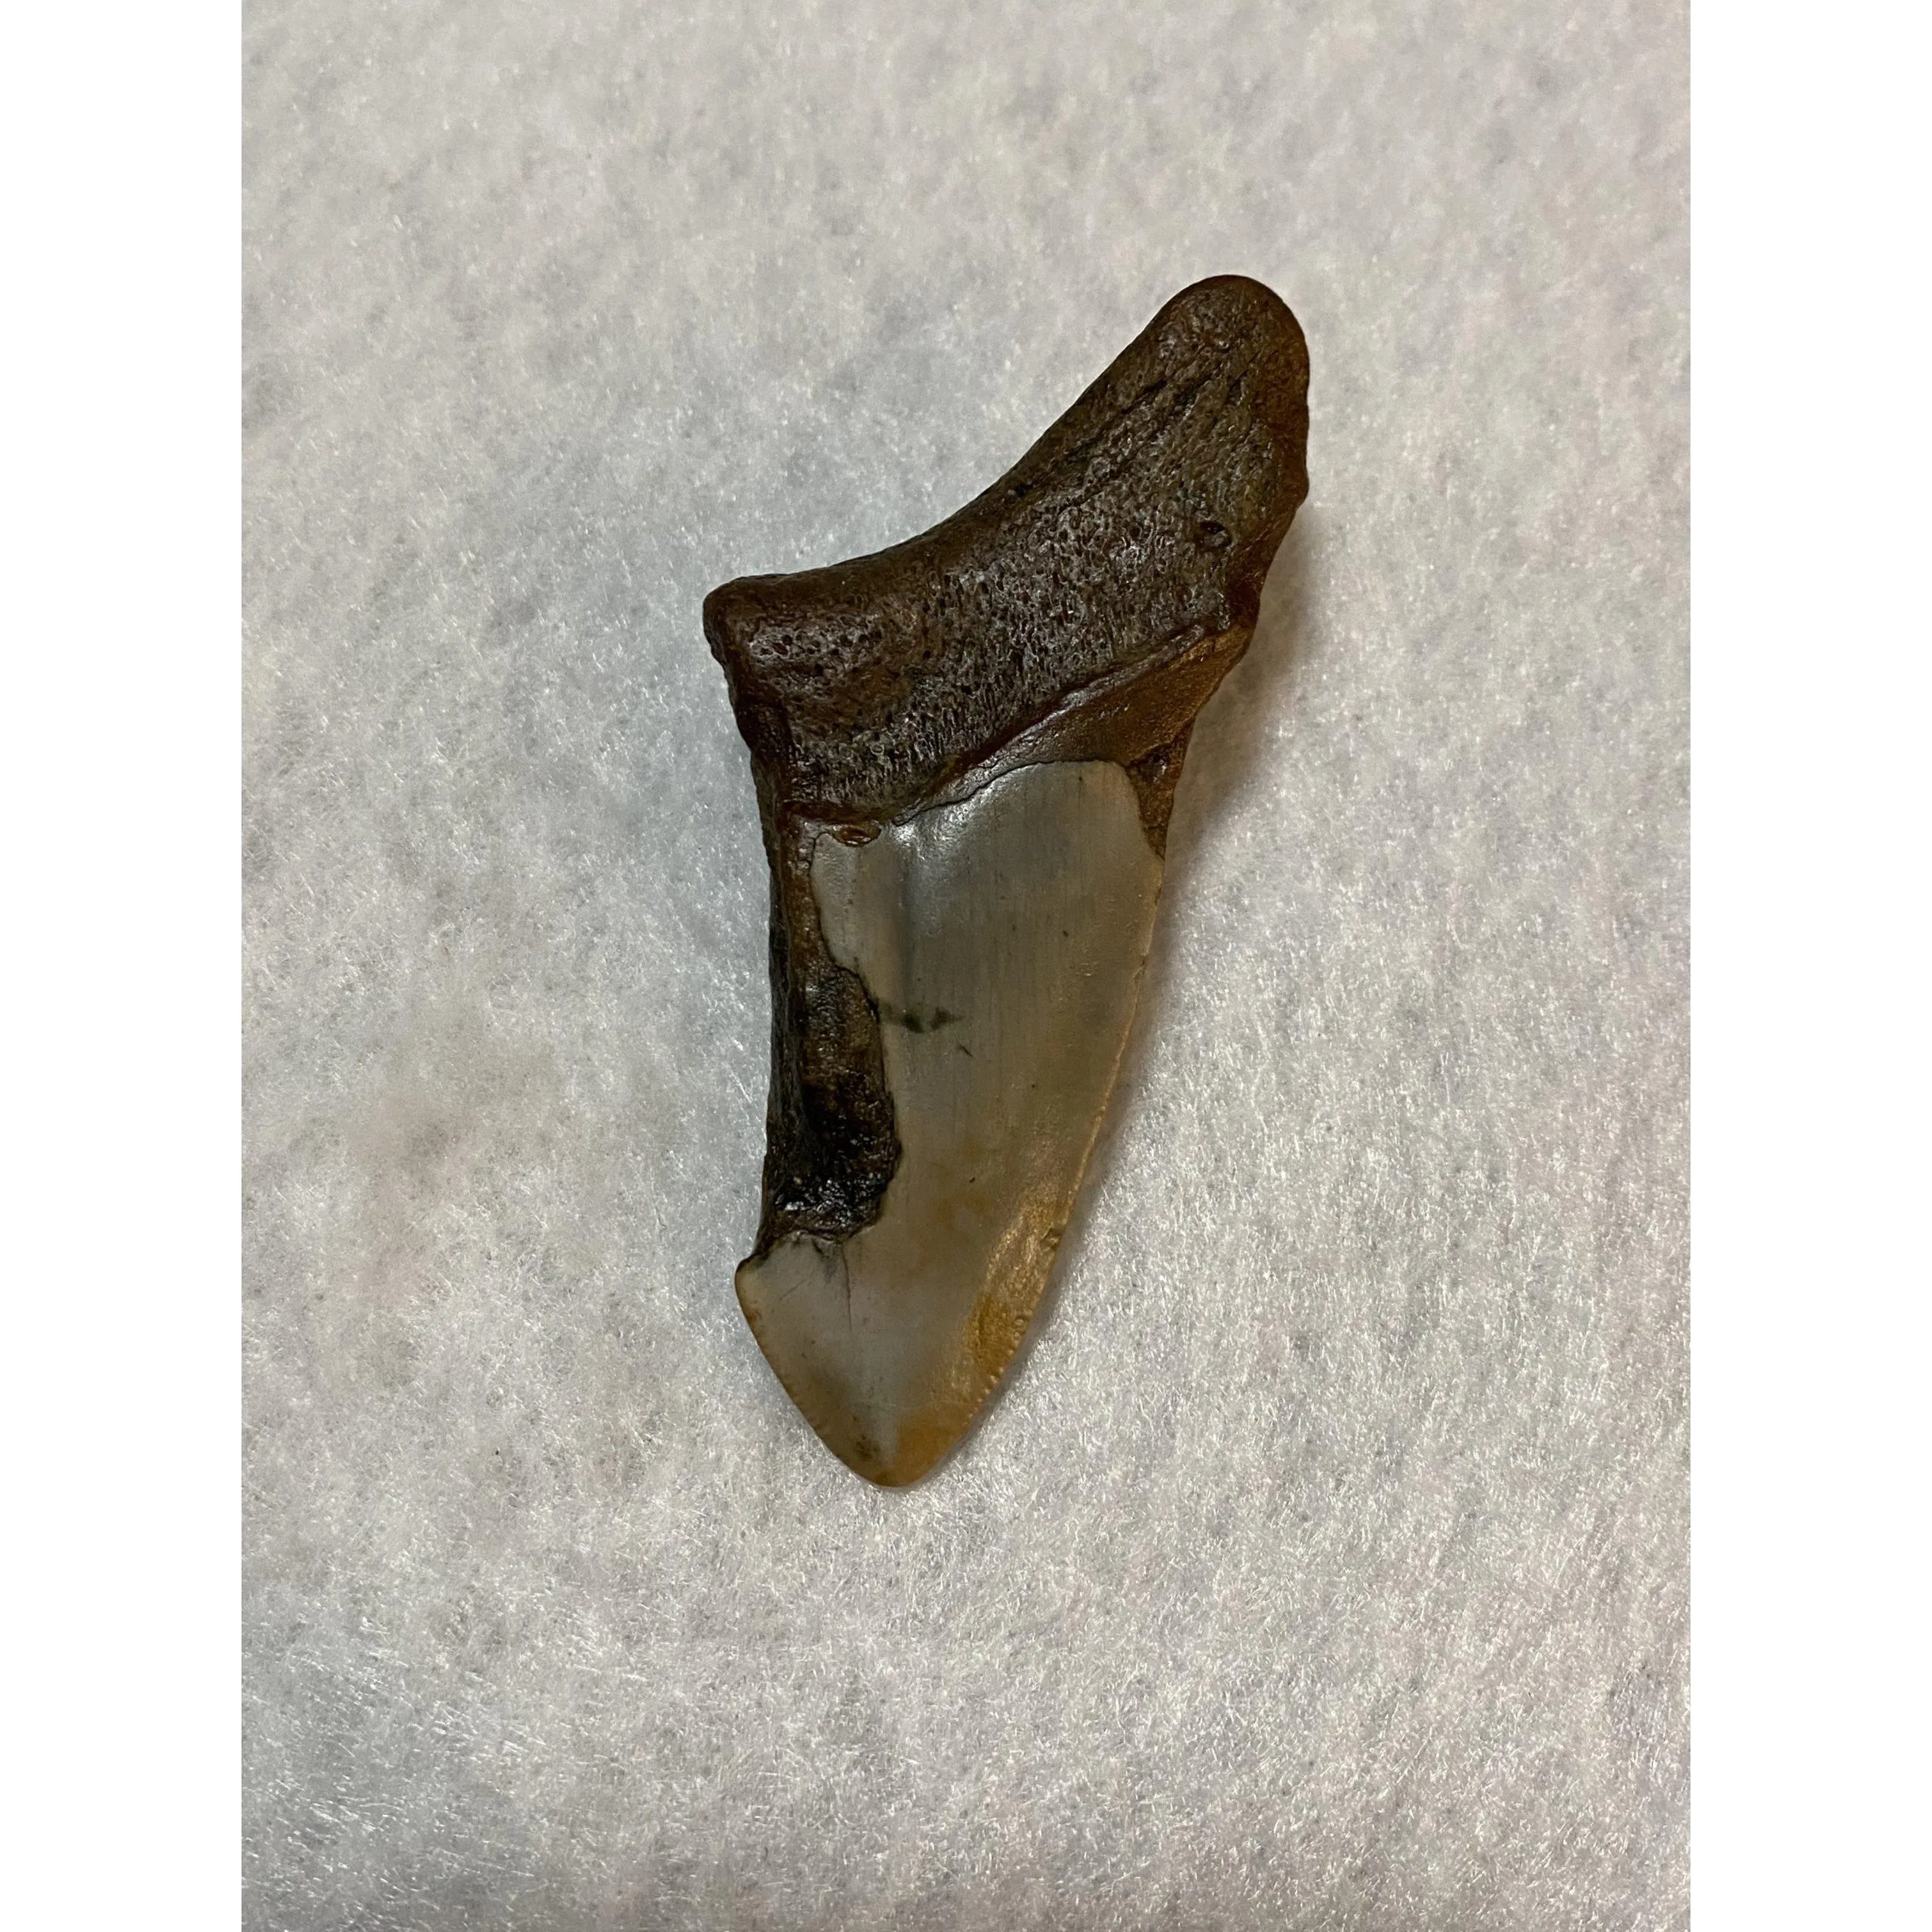 Megalodon Partial Tooth  South Carolina 3.45 inch Prehistoric Online